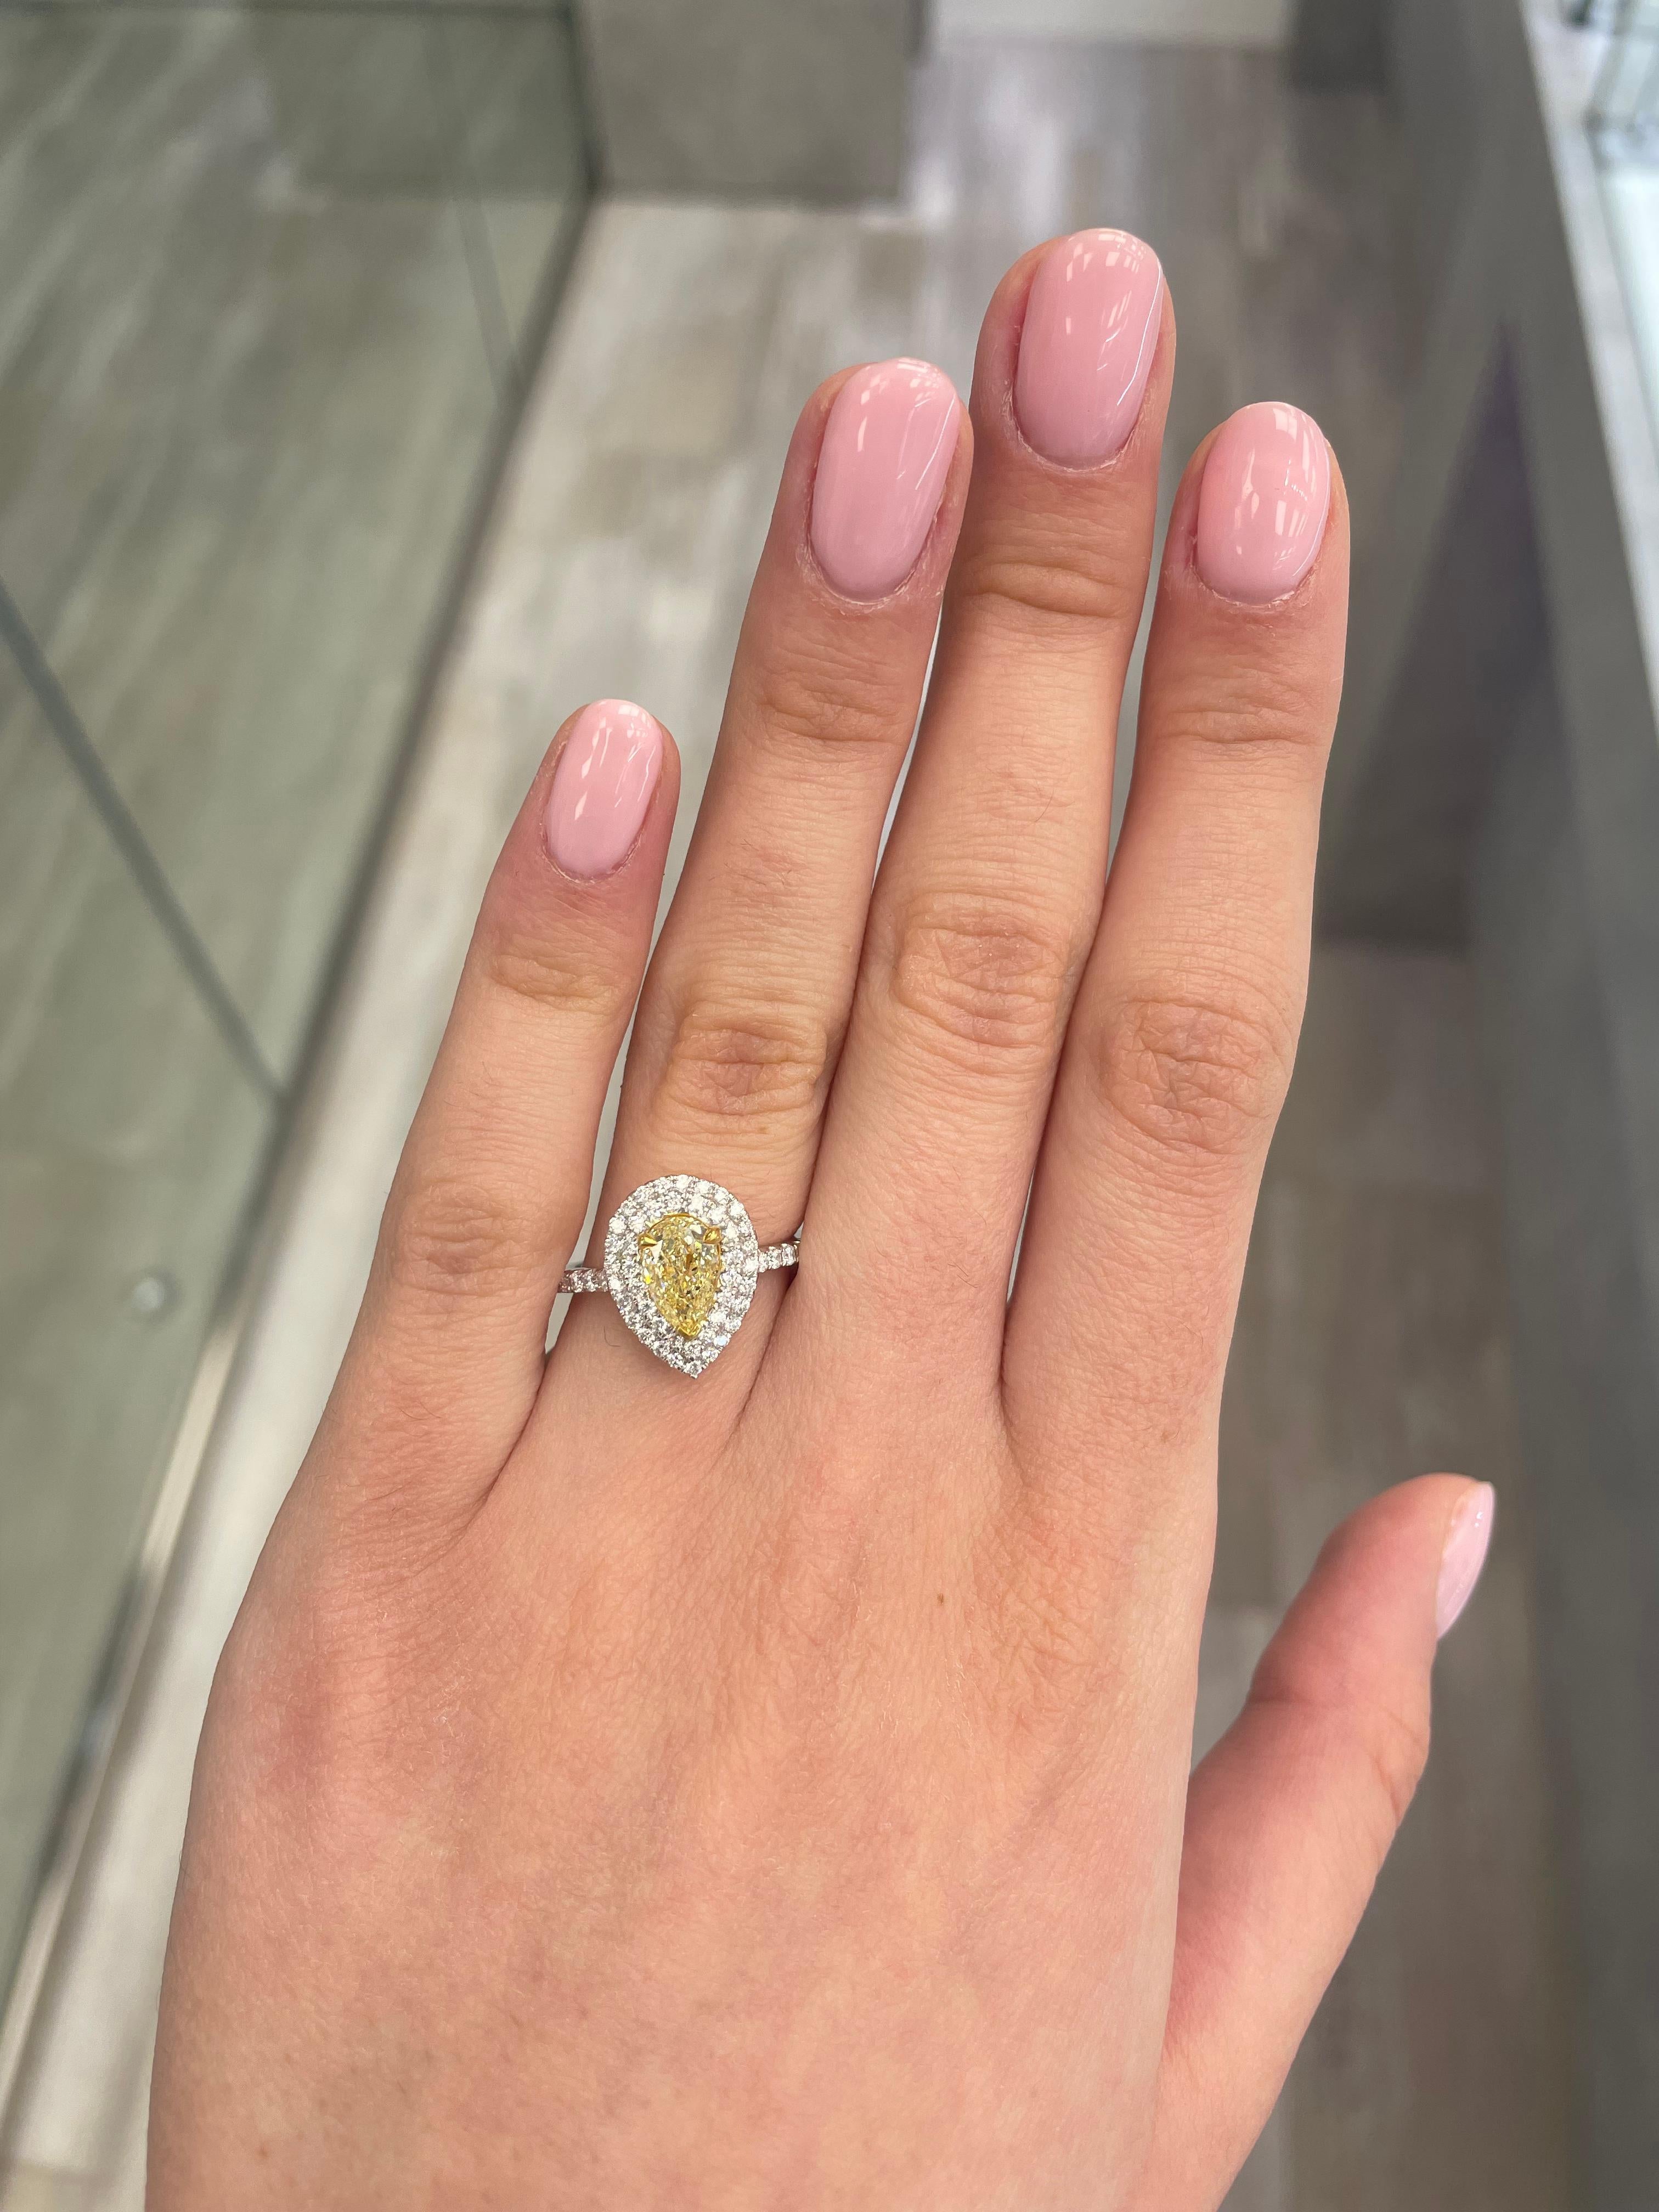 Stunning modern EGL certified yellow diamond double halo ring, two-tone 18k yellow and white gold. By Alexander Beverly Hills
1.68 carats total diamond weight.
1.06 carat pear cut Fancy Yellow color and SI2 clarity diamond, EGL graded in the